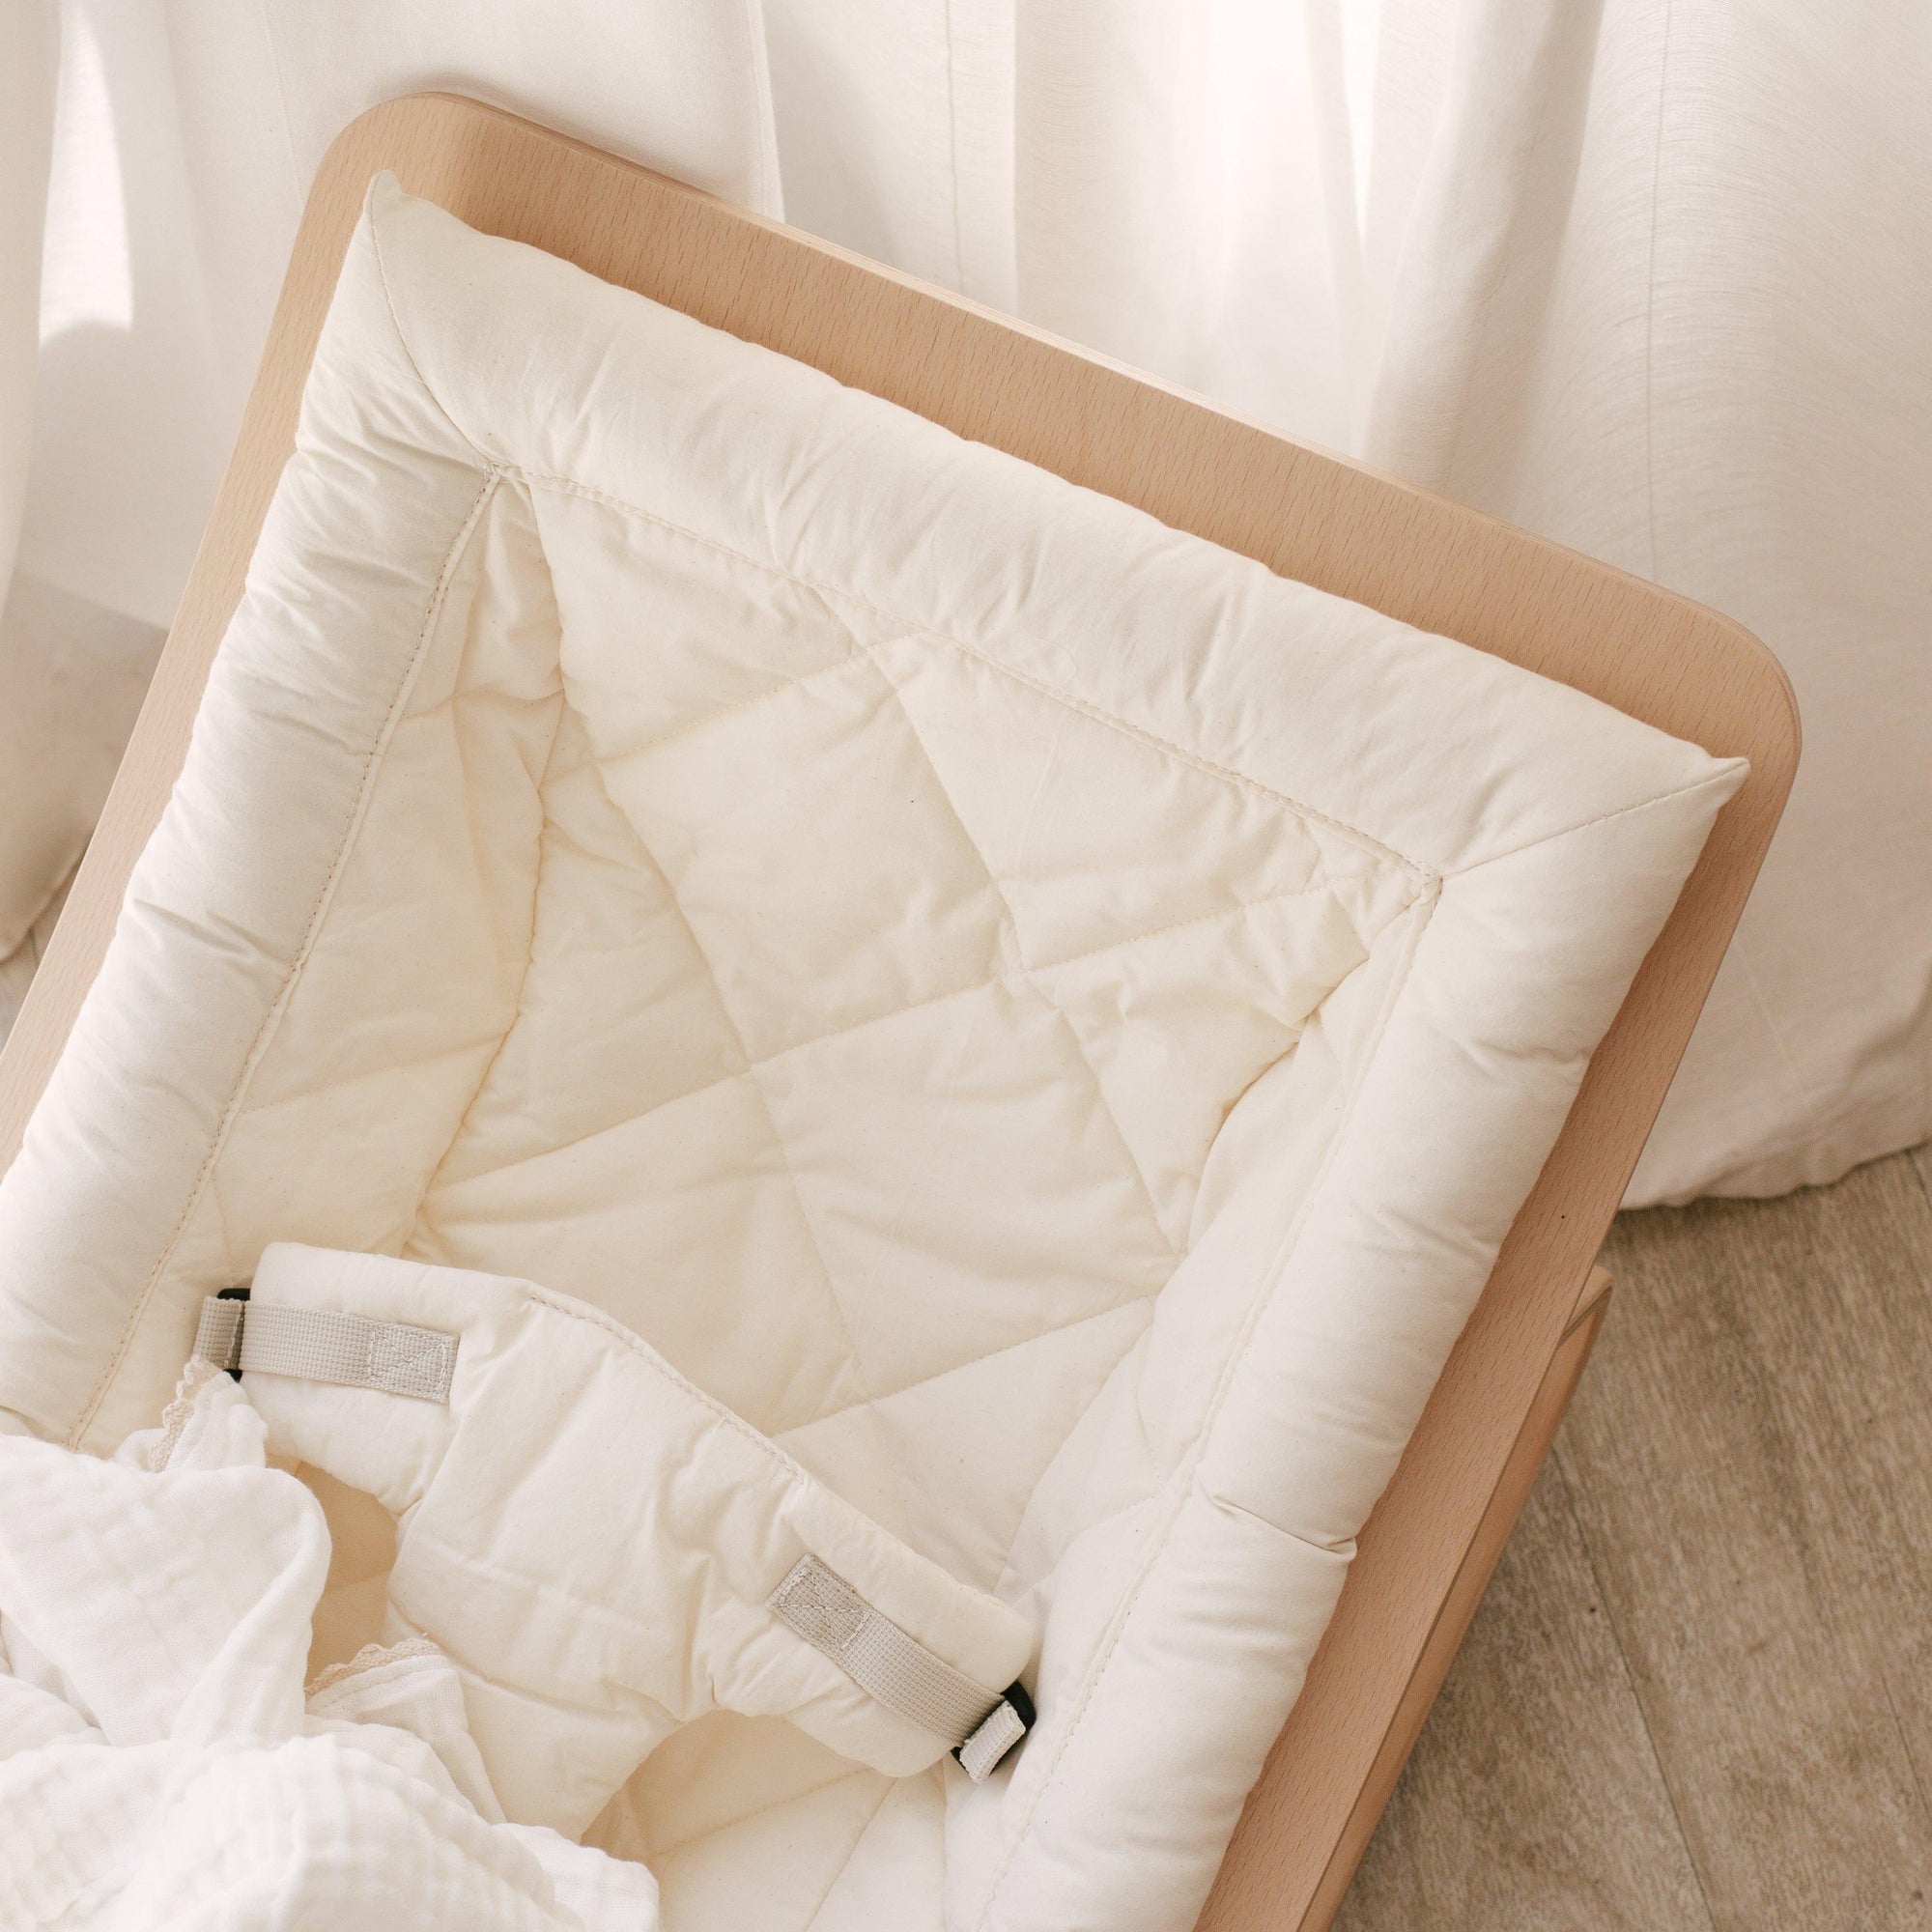 A Levo baby rocker in organic white with a blanket.